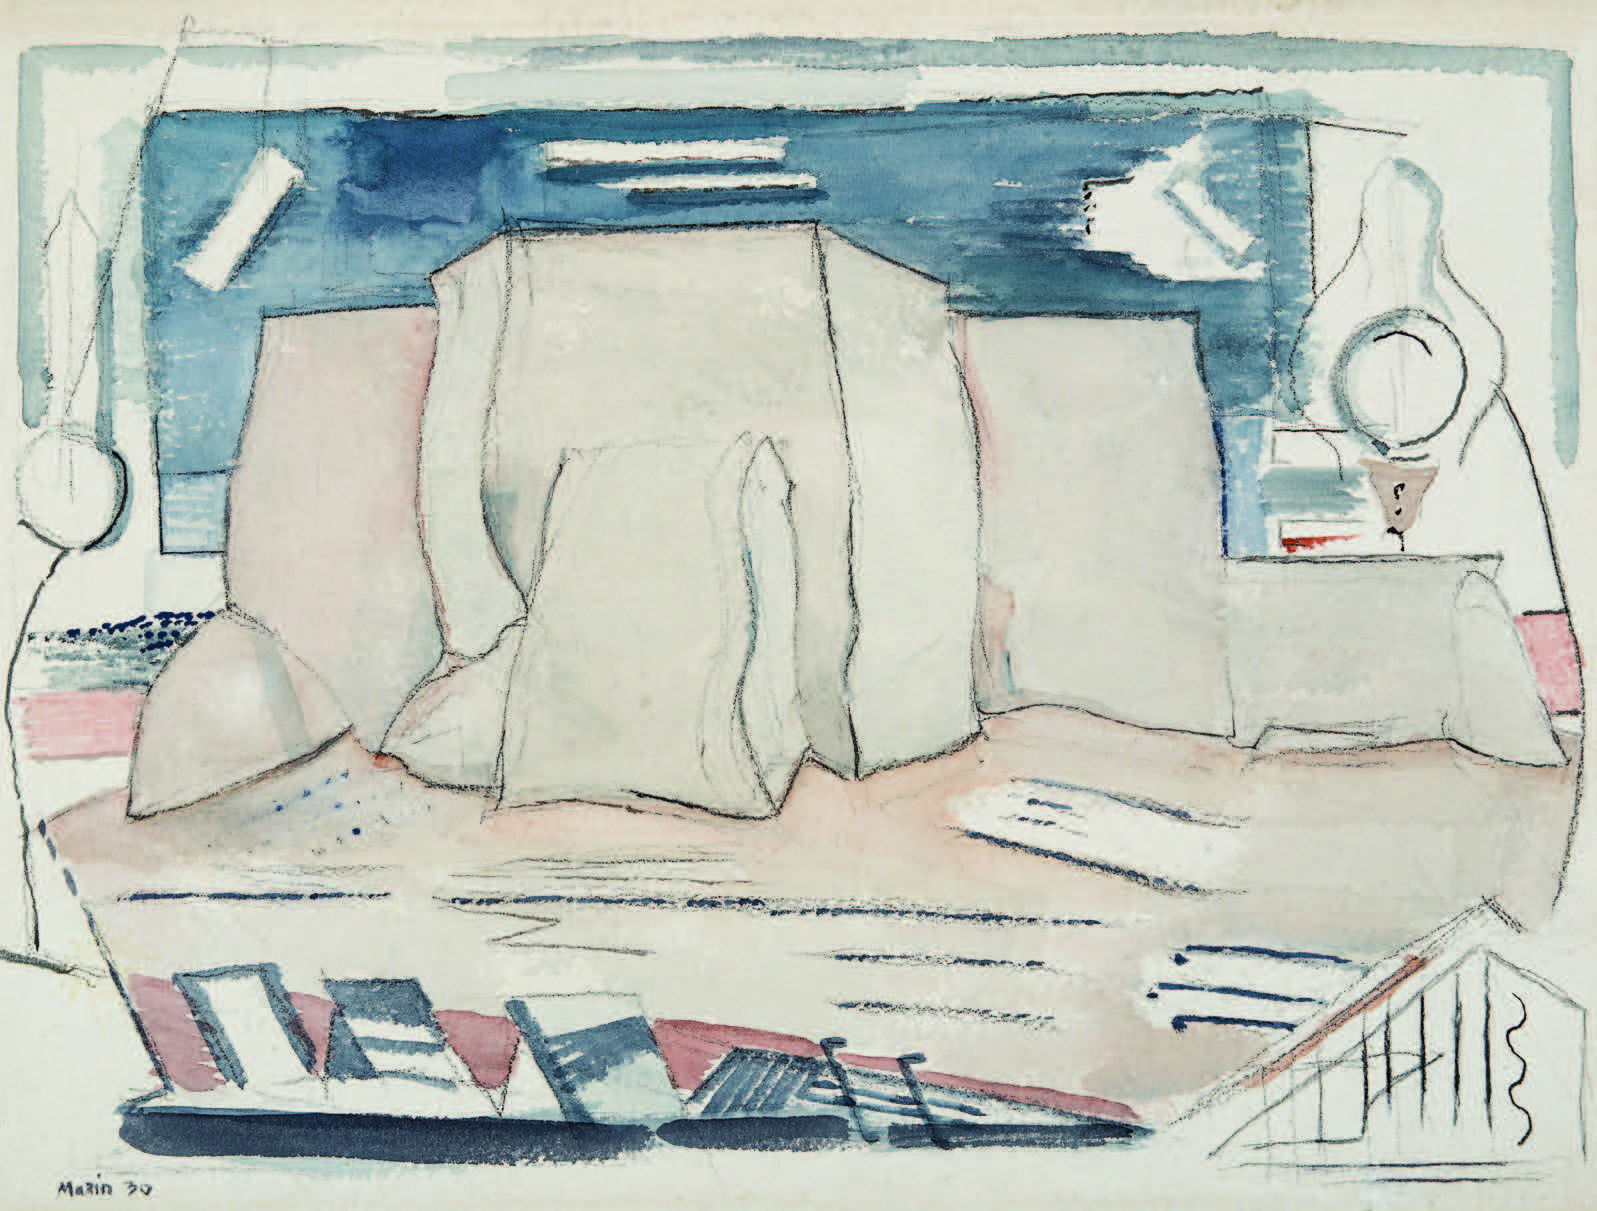 John Marin, Back of Ranchos Church, 1930. Watercolor on paper, 15 × 20 ½ in. Collection of the New Mexico Museum of Art. Bequest of Helen Miller Jones, 1986 (1986.137.14).